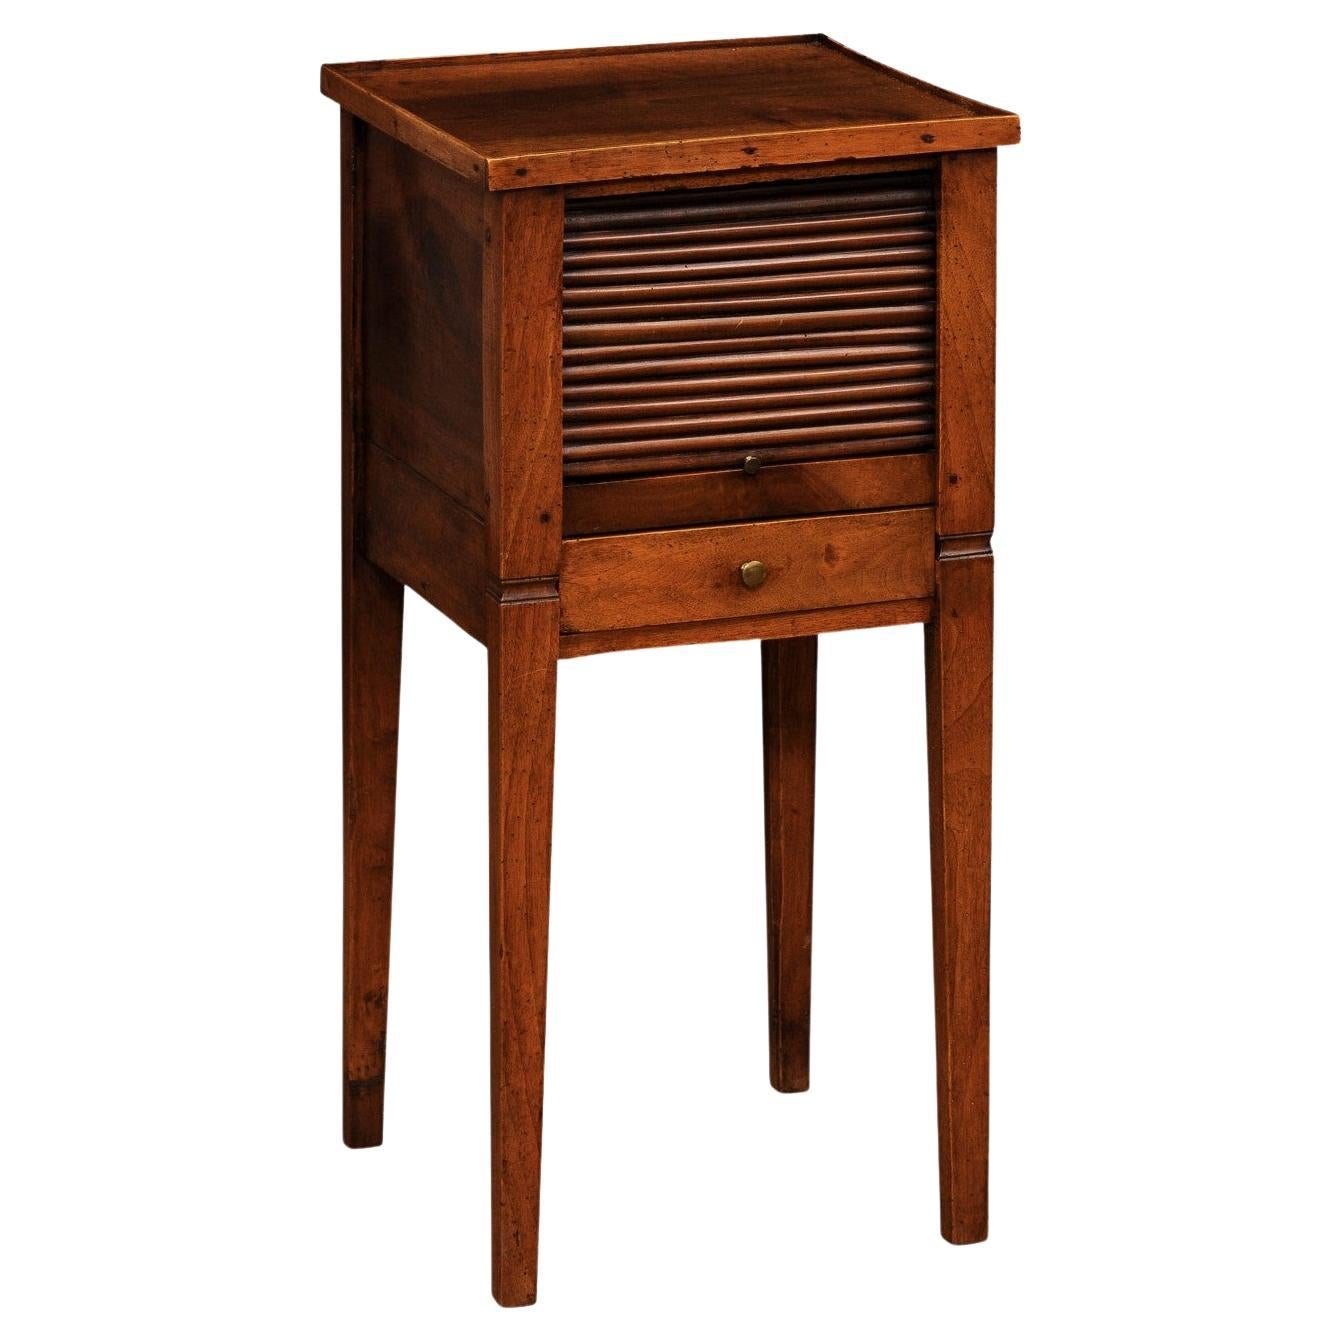 French Louis XVI Style 1890s Walnut Bedside Table with Tambour Door